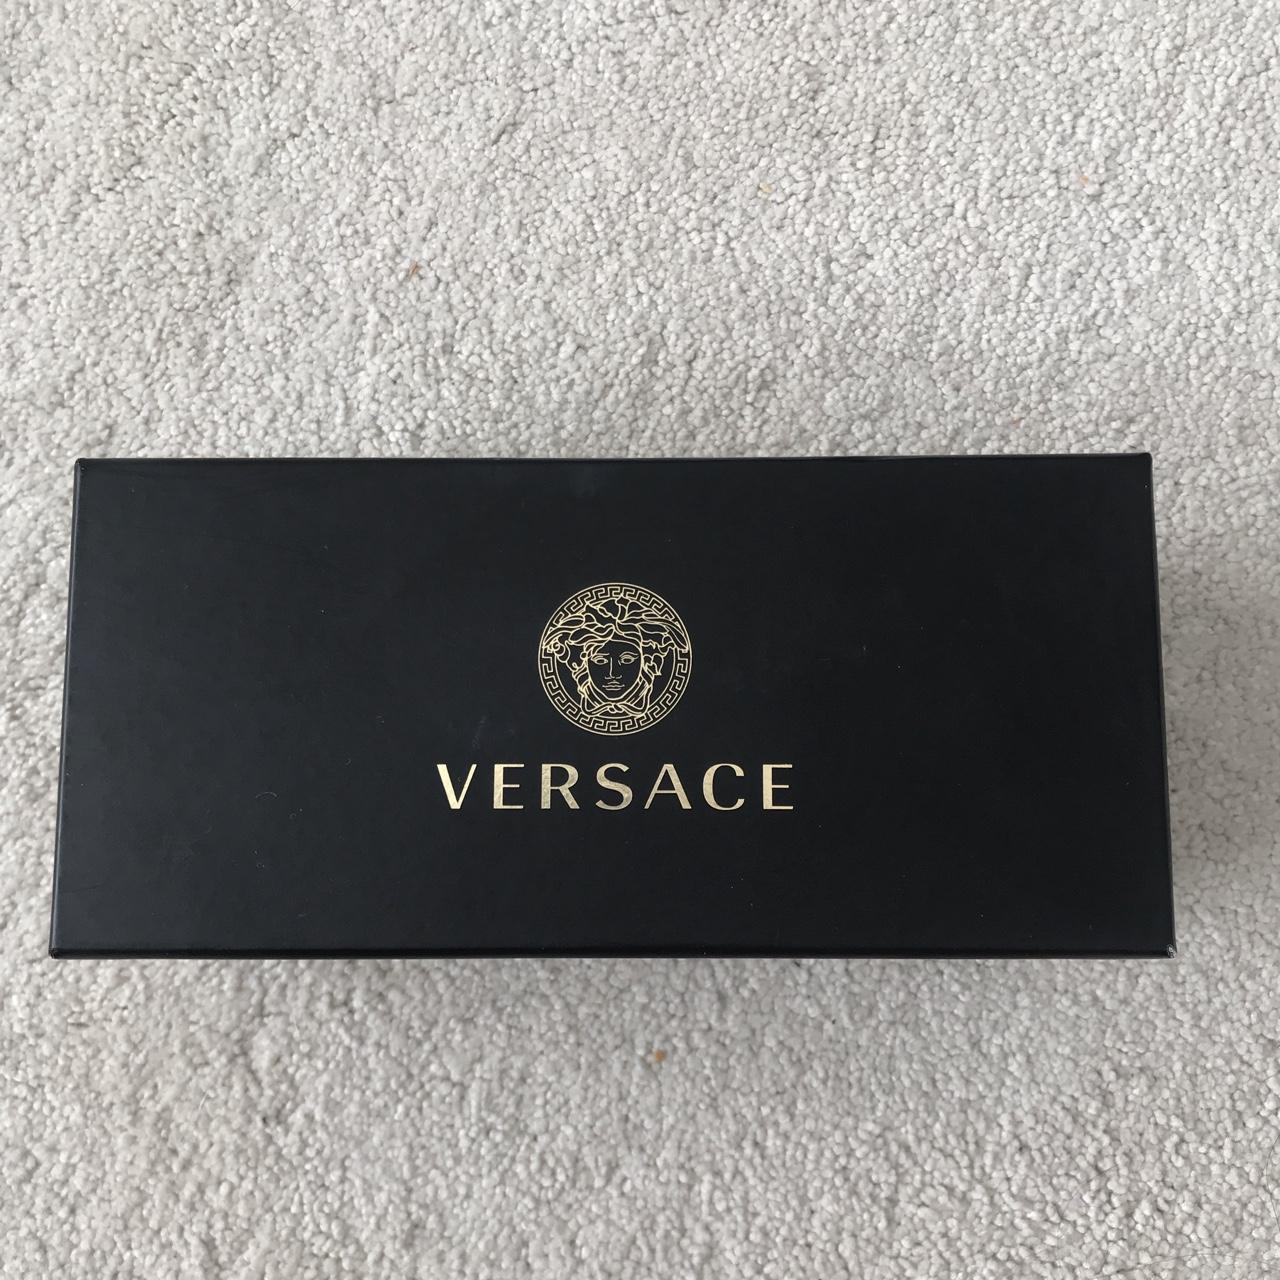 Versace black leather glasses case with gold and... - Depop